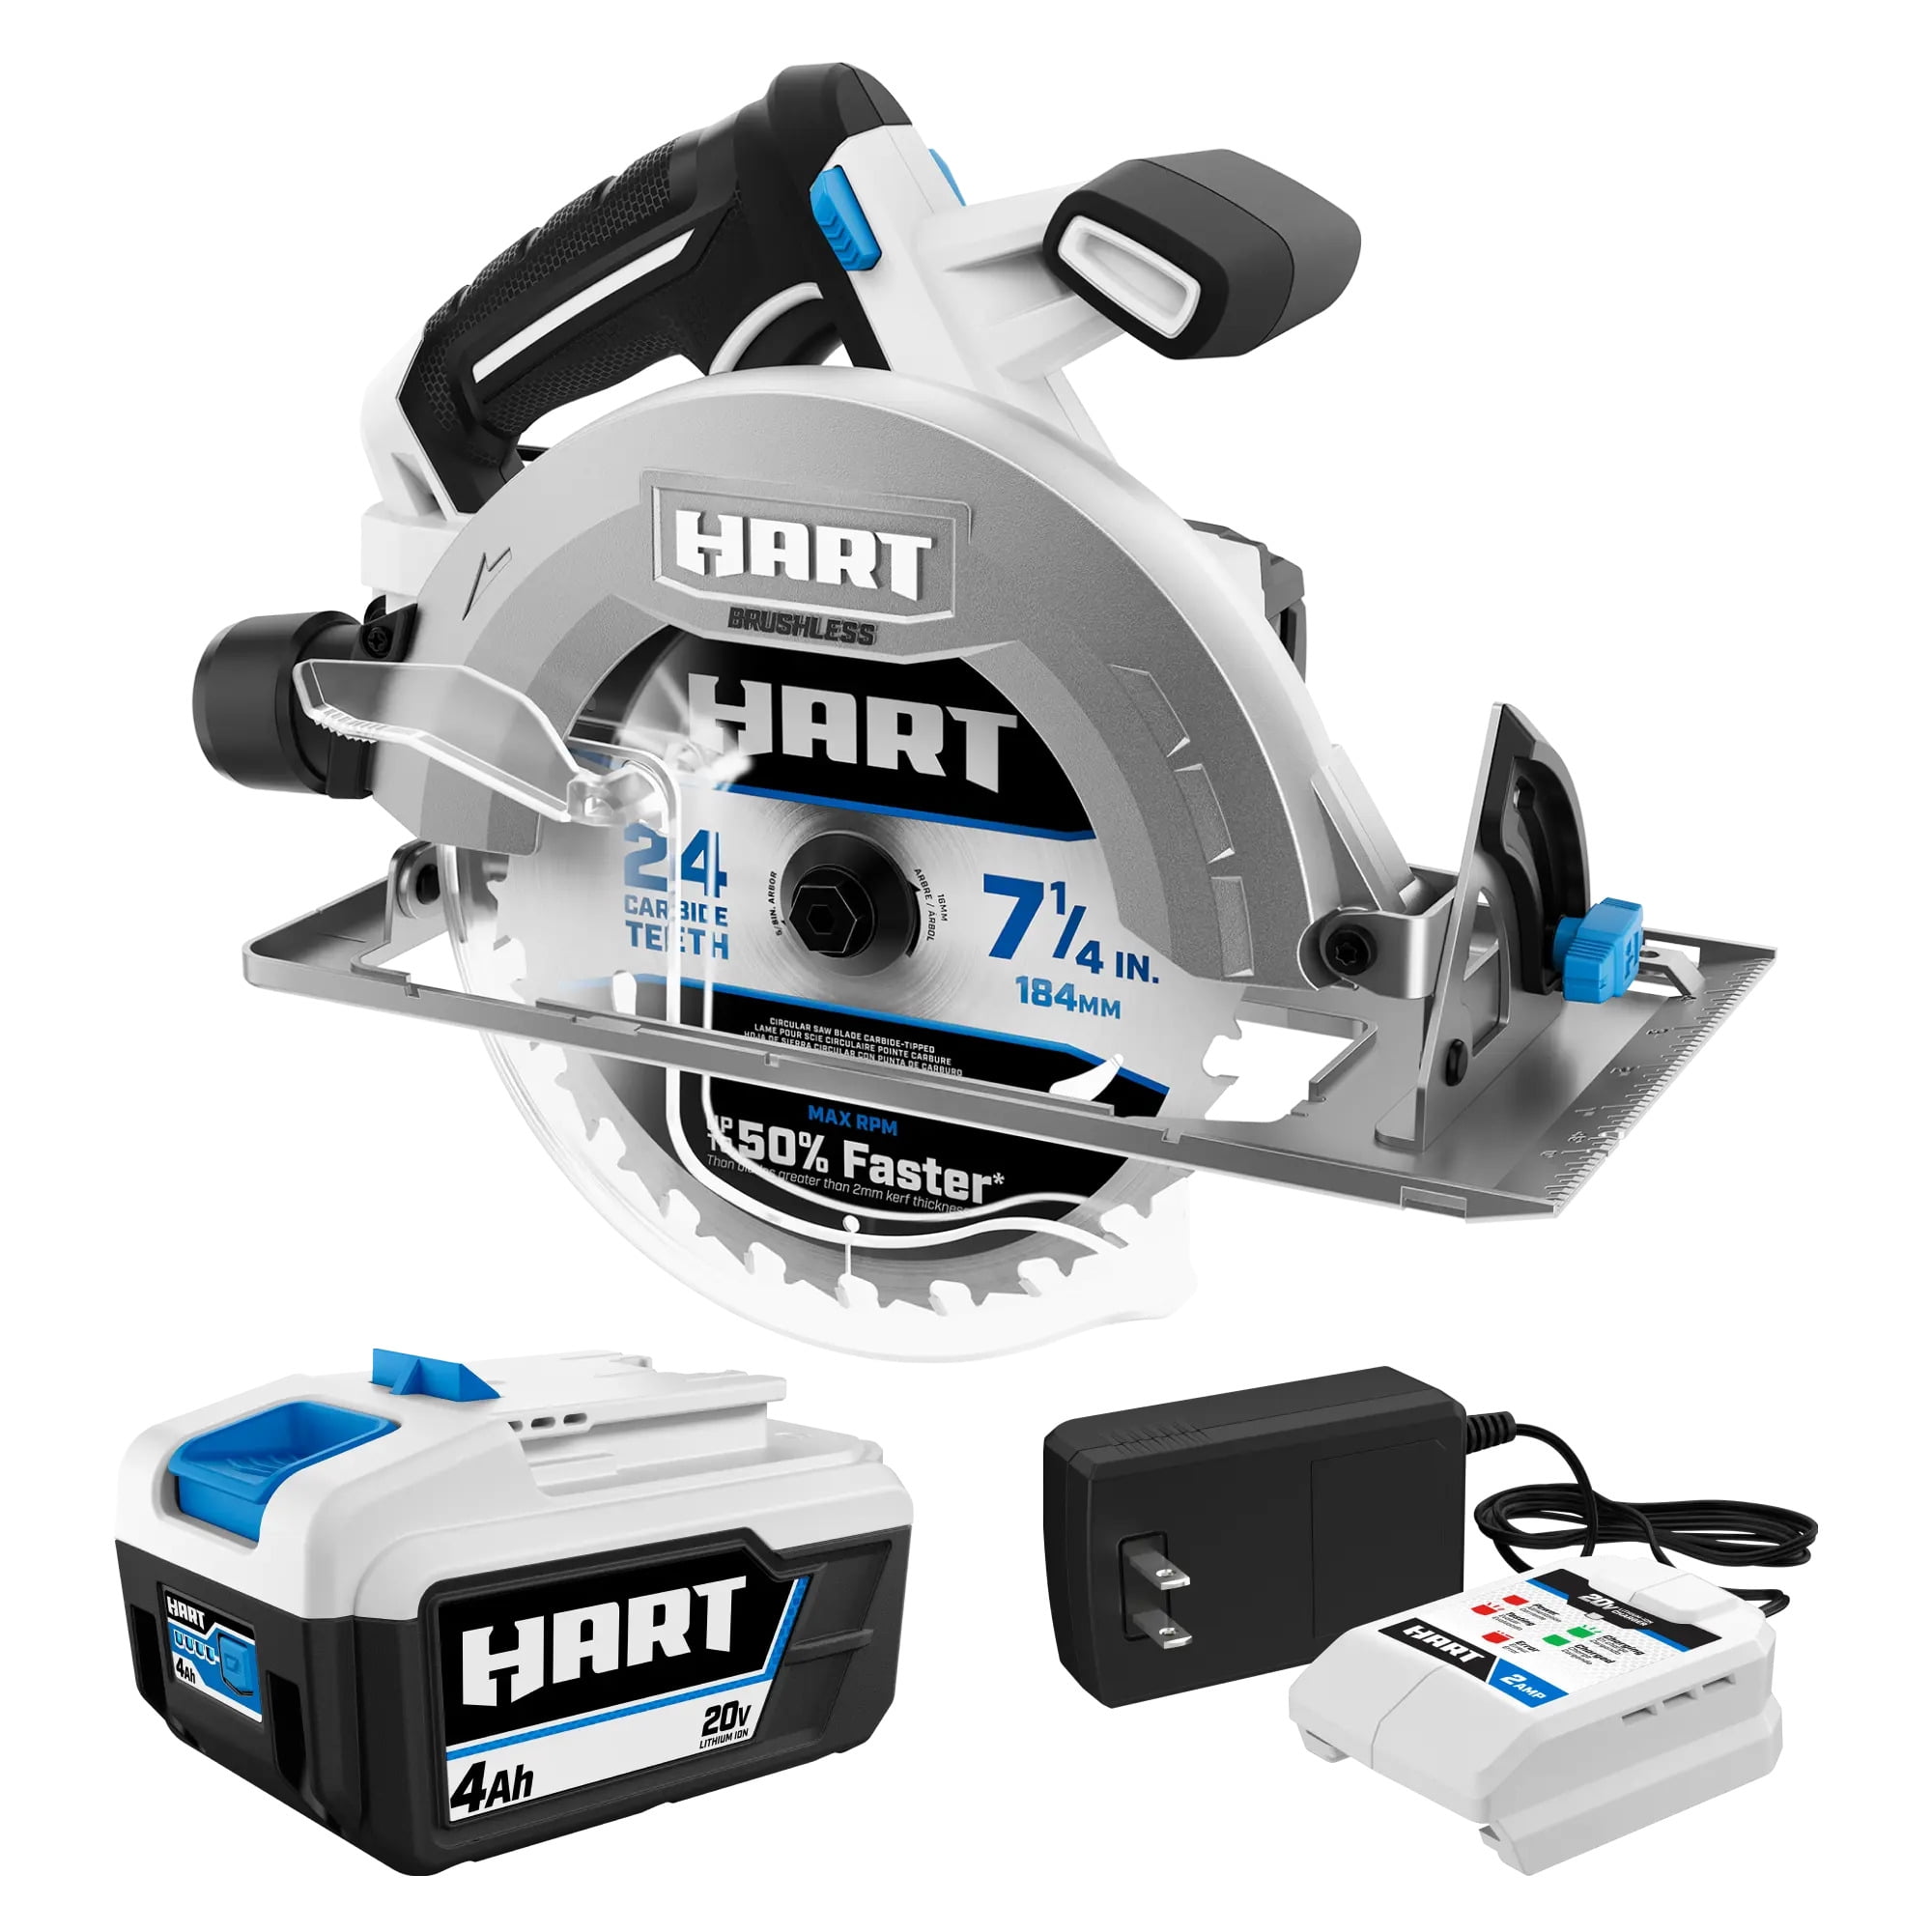 HART 20-Volt Brushless 7-1/4 Inch Circular Saw with 4Ah Battery and Charger Starter Kit